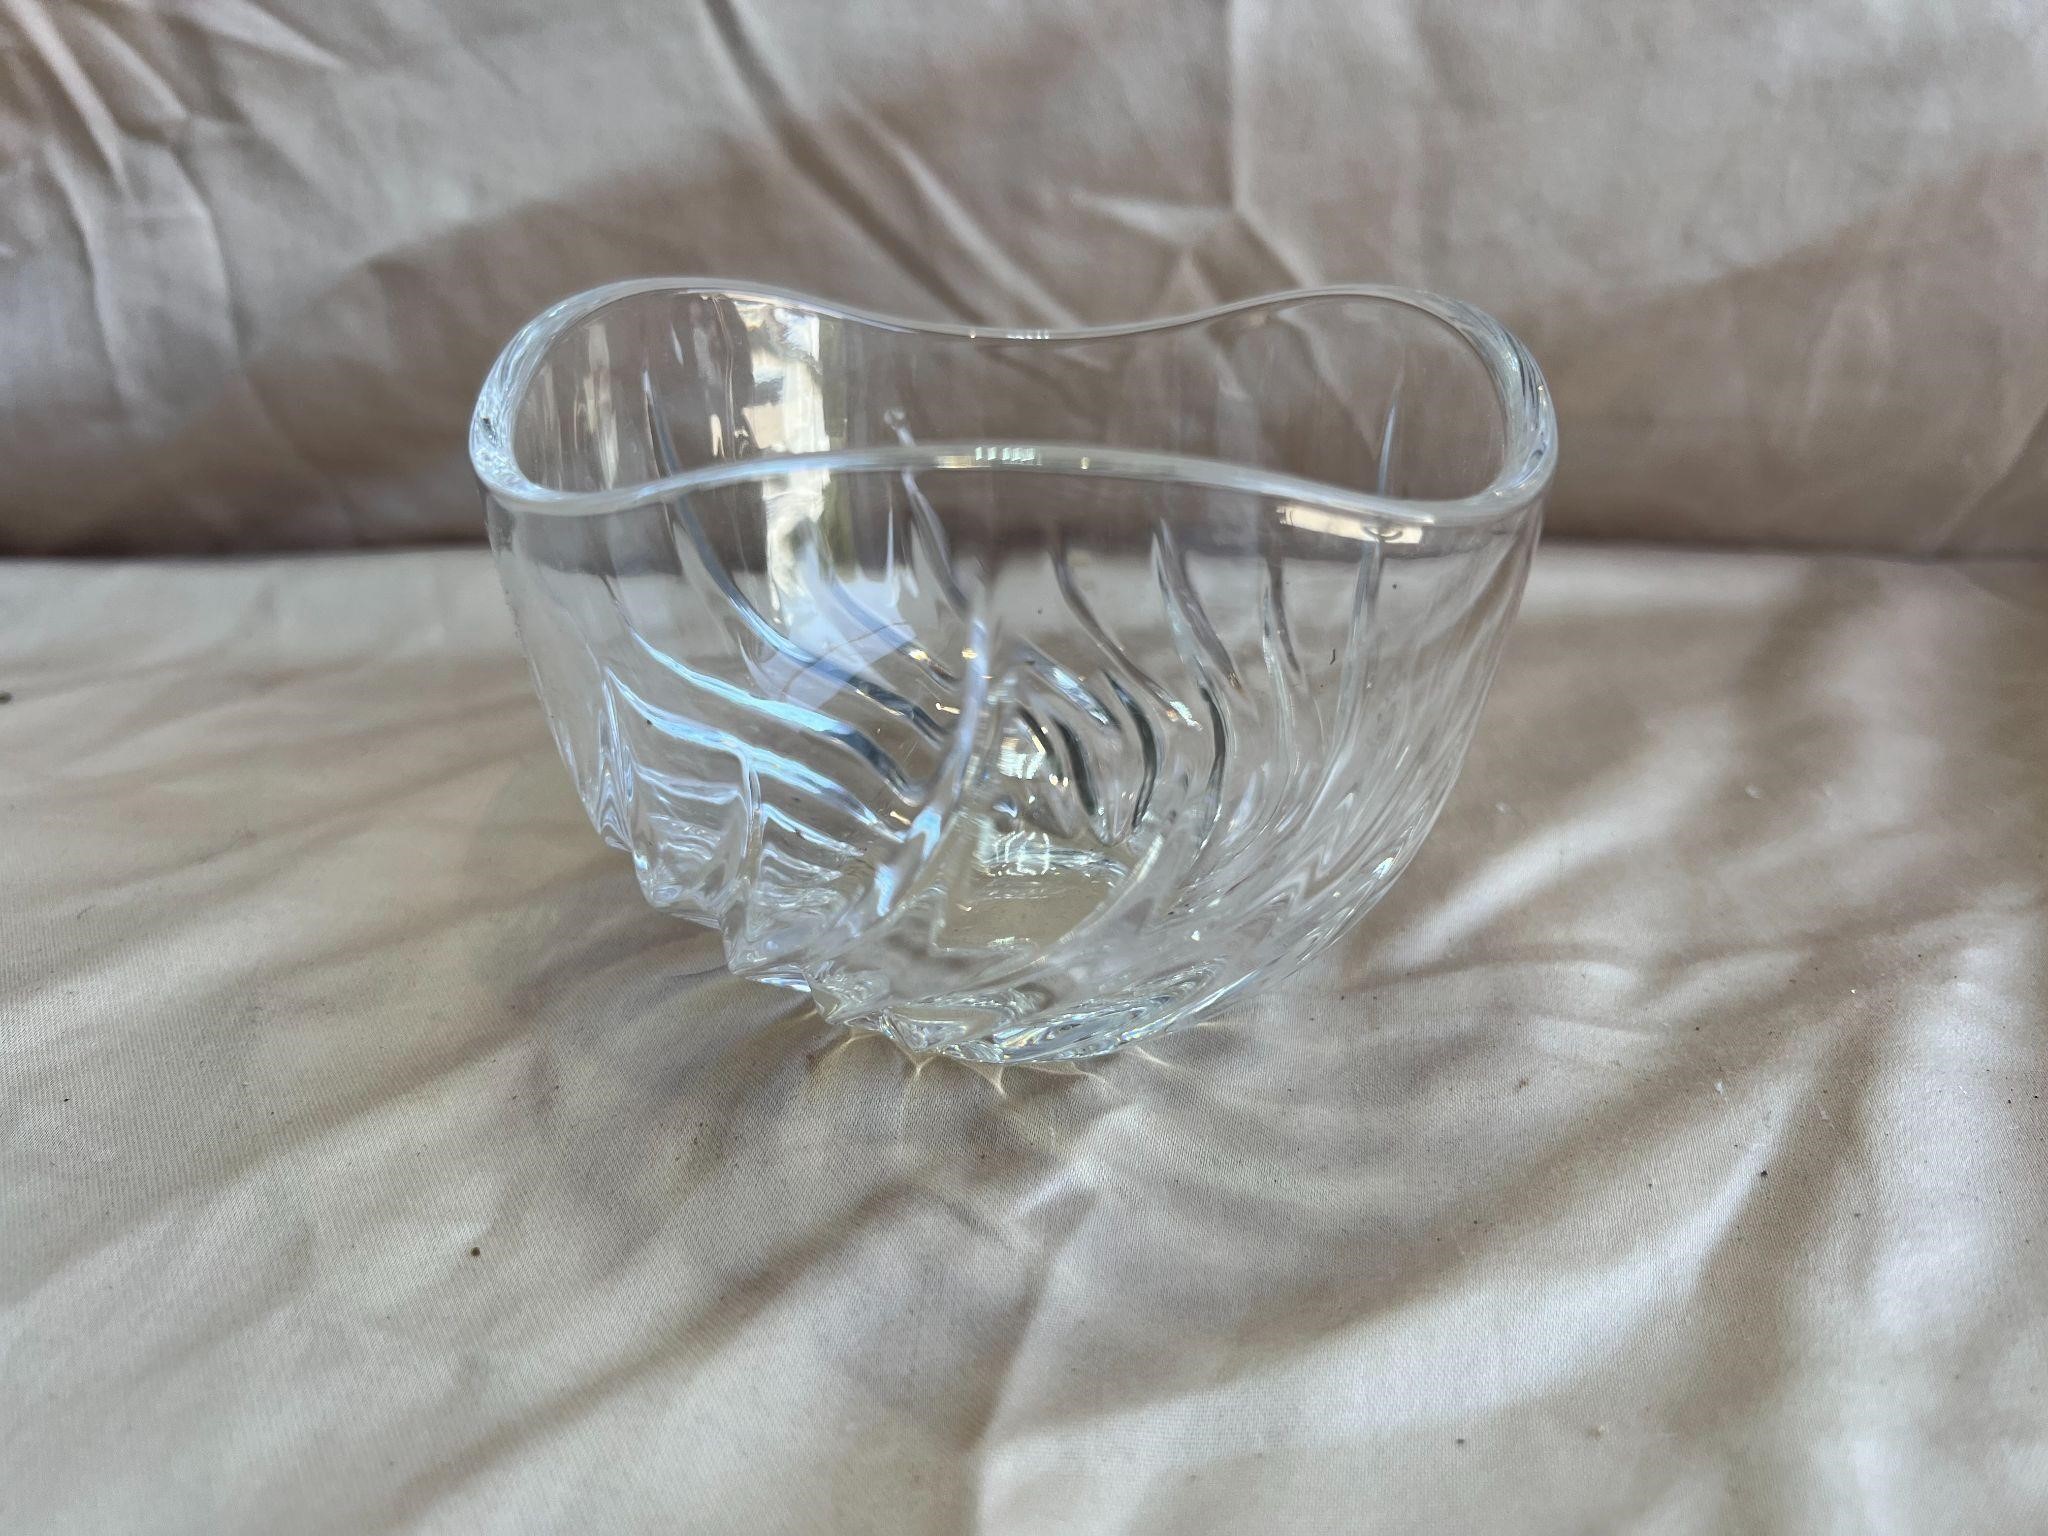 Second Glass Candy Dish